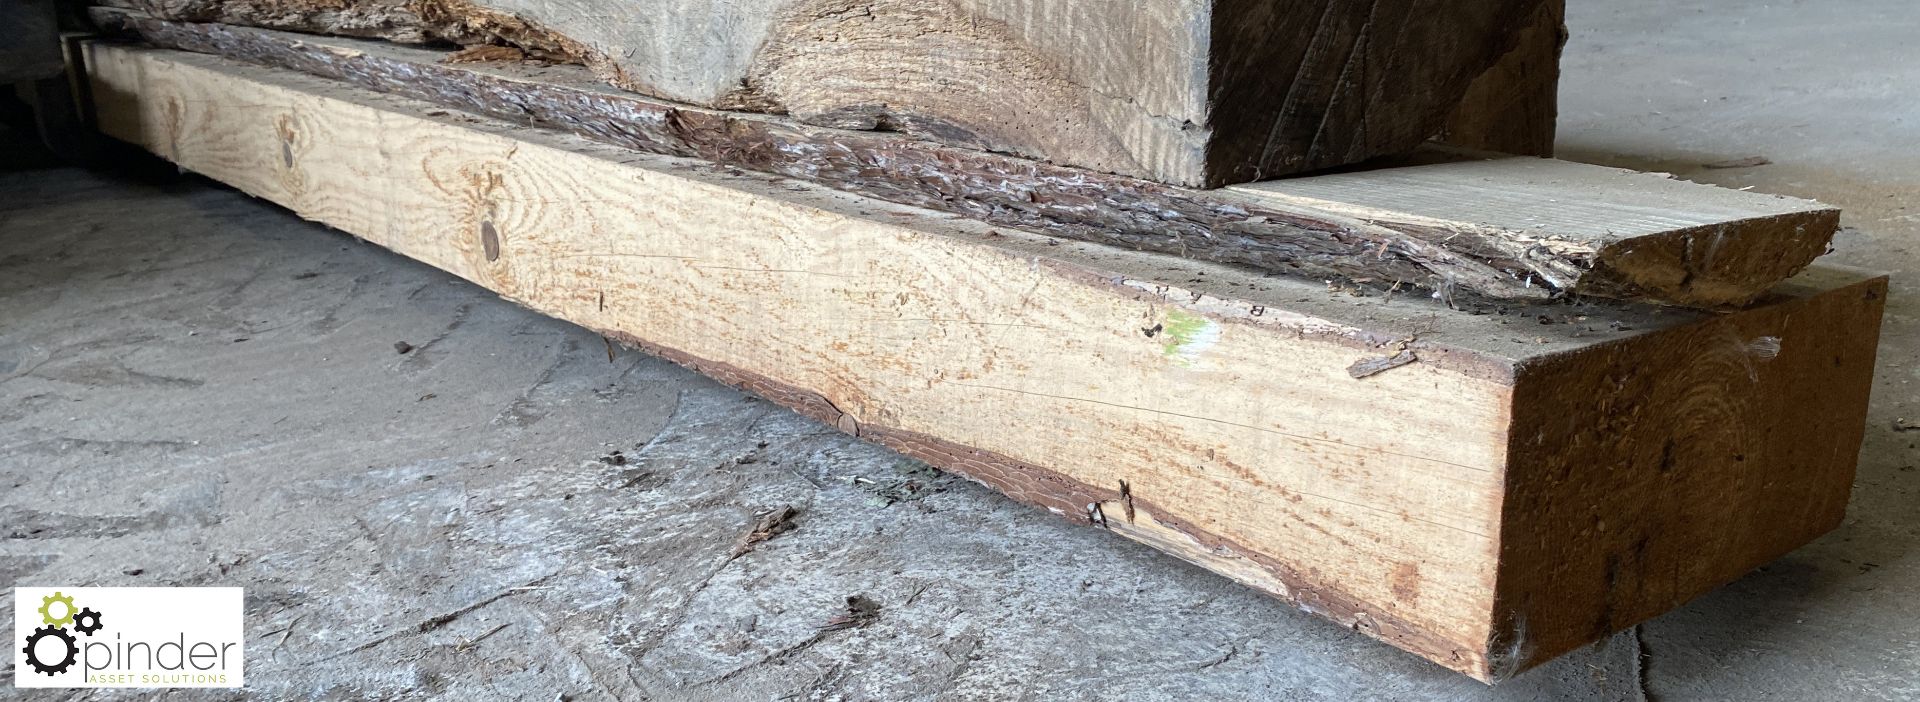 Air dried Softwood Beam, 6080mm x 370mm x 150mm and air dried Softwood Board, 6060mm x 350mm x 50mm - Image 4 of 5